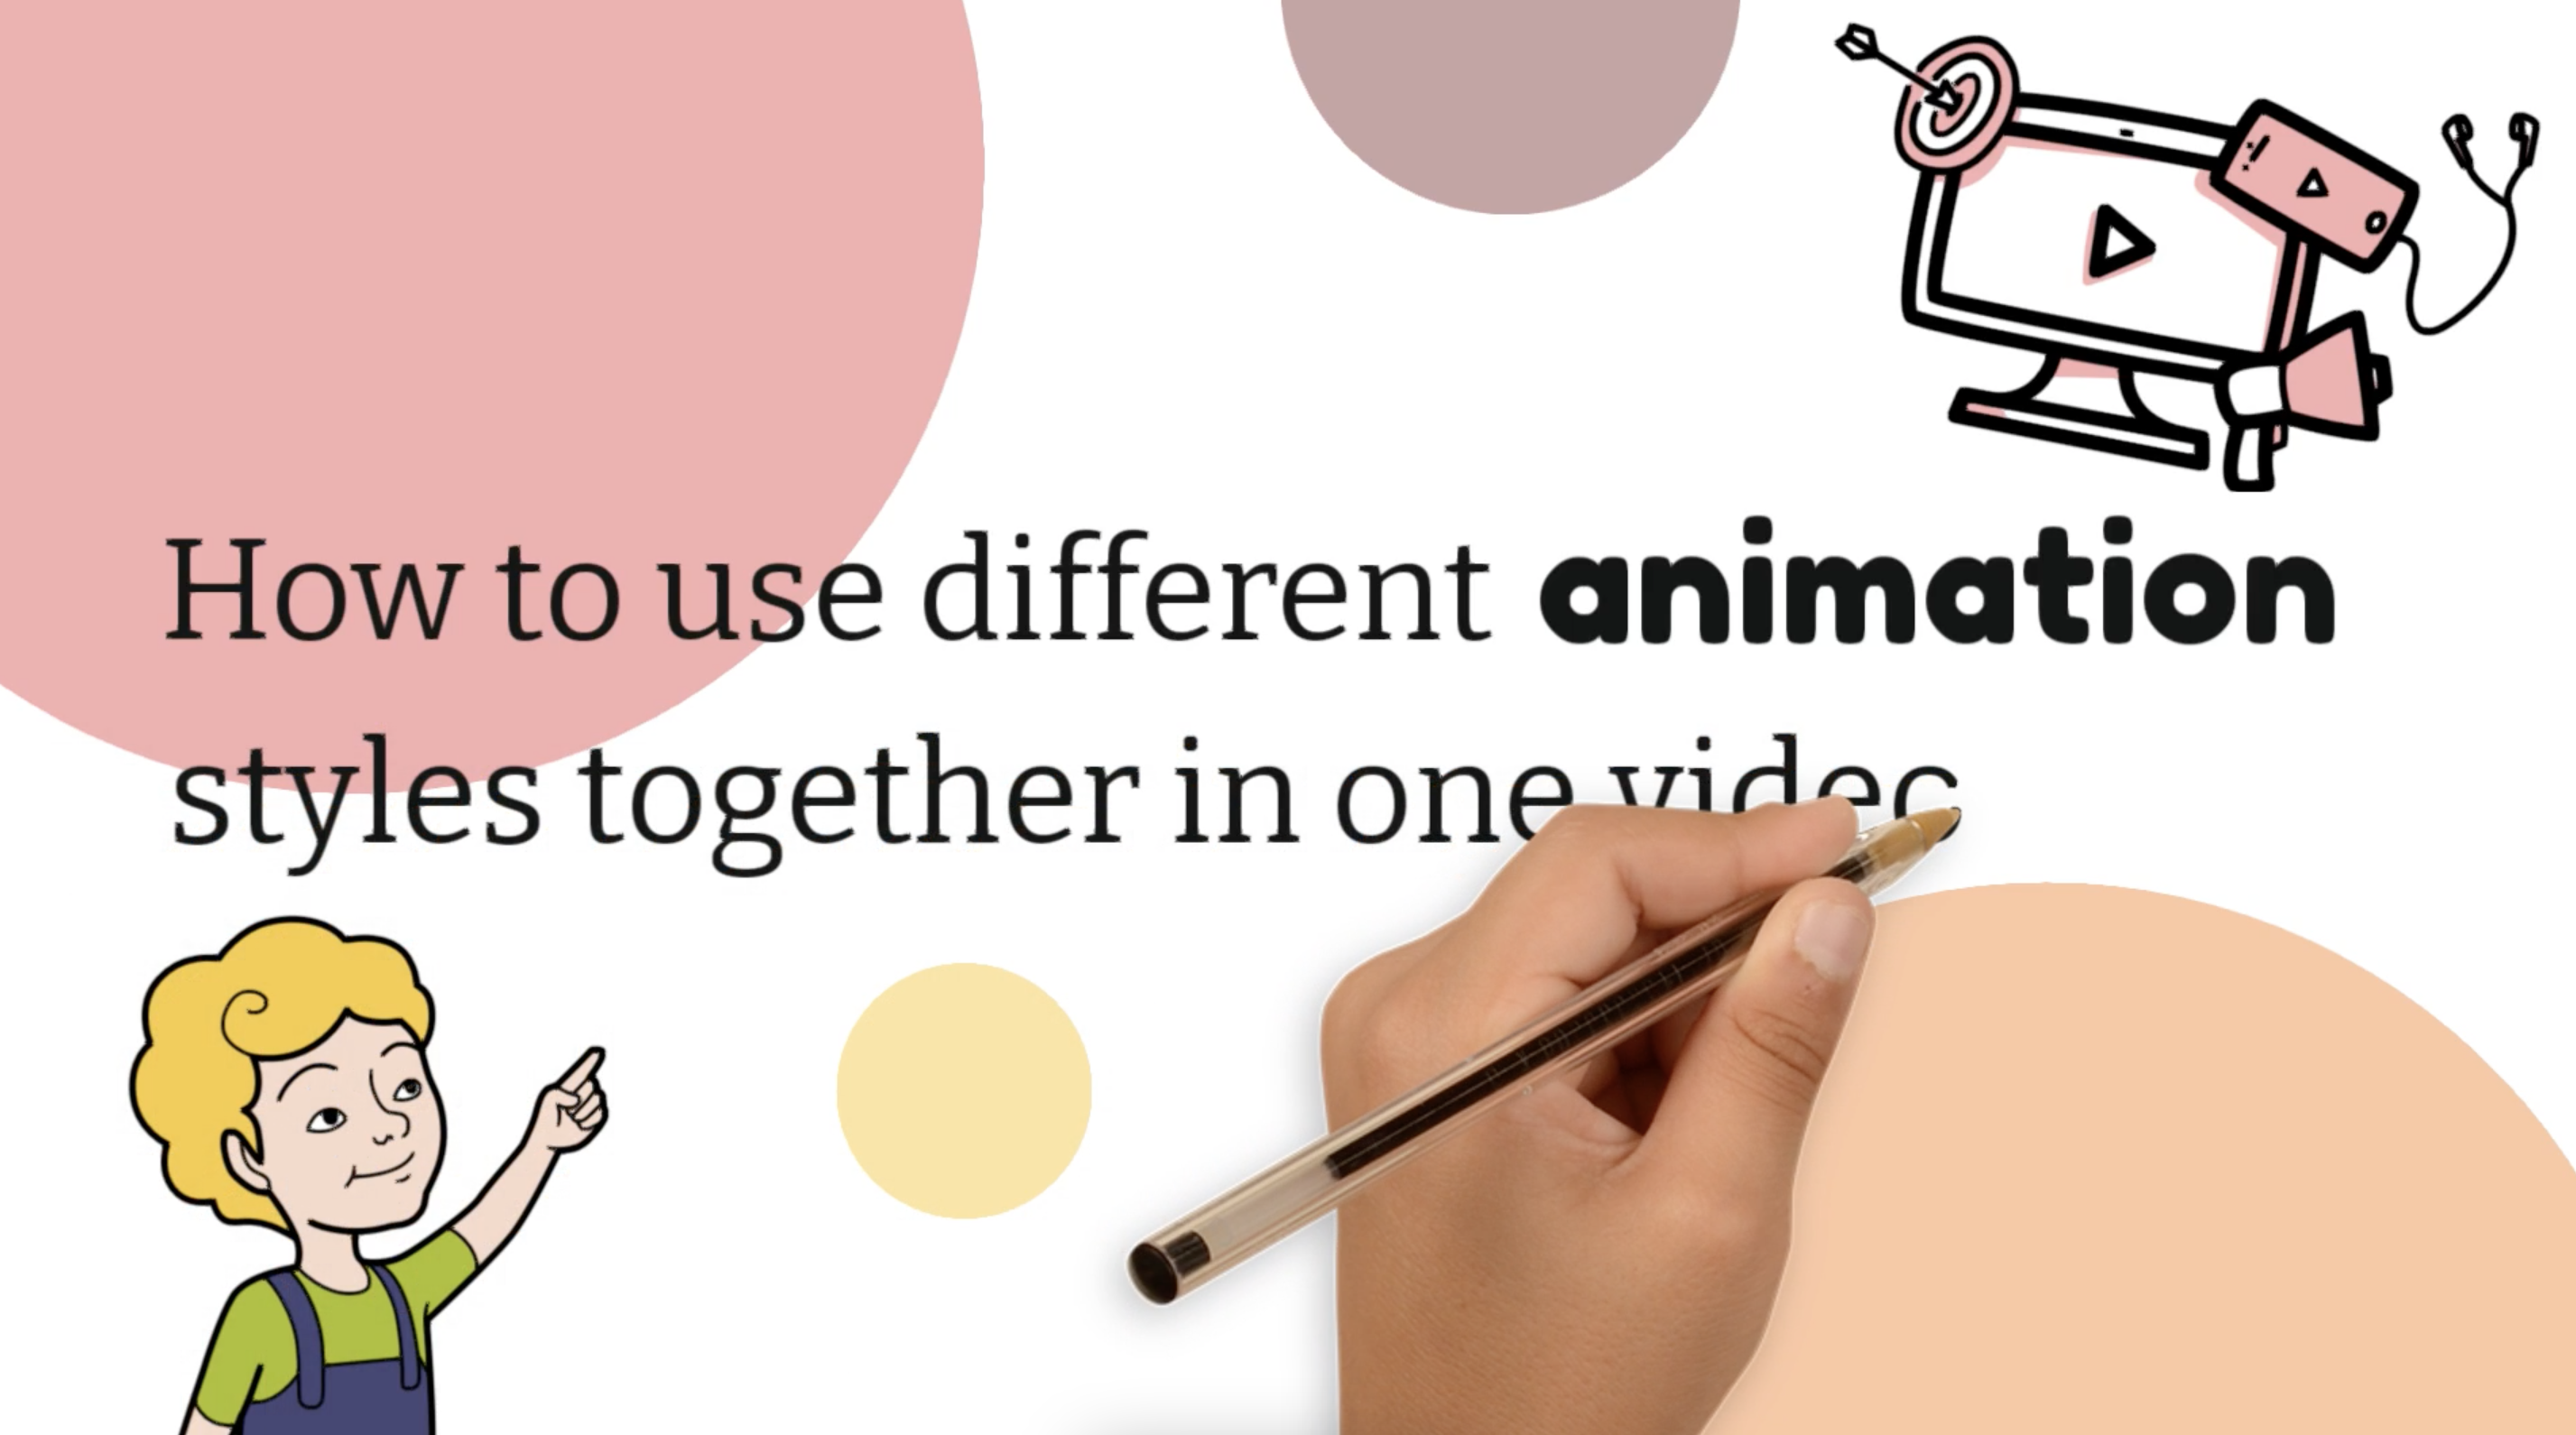 How to use different animation styles together in one video